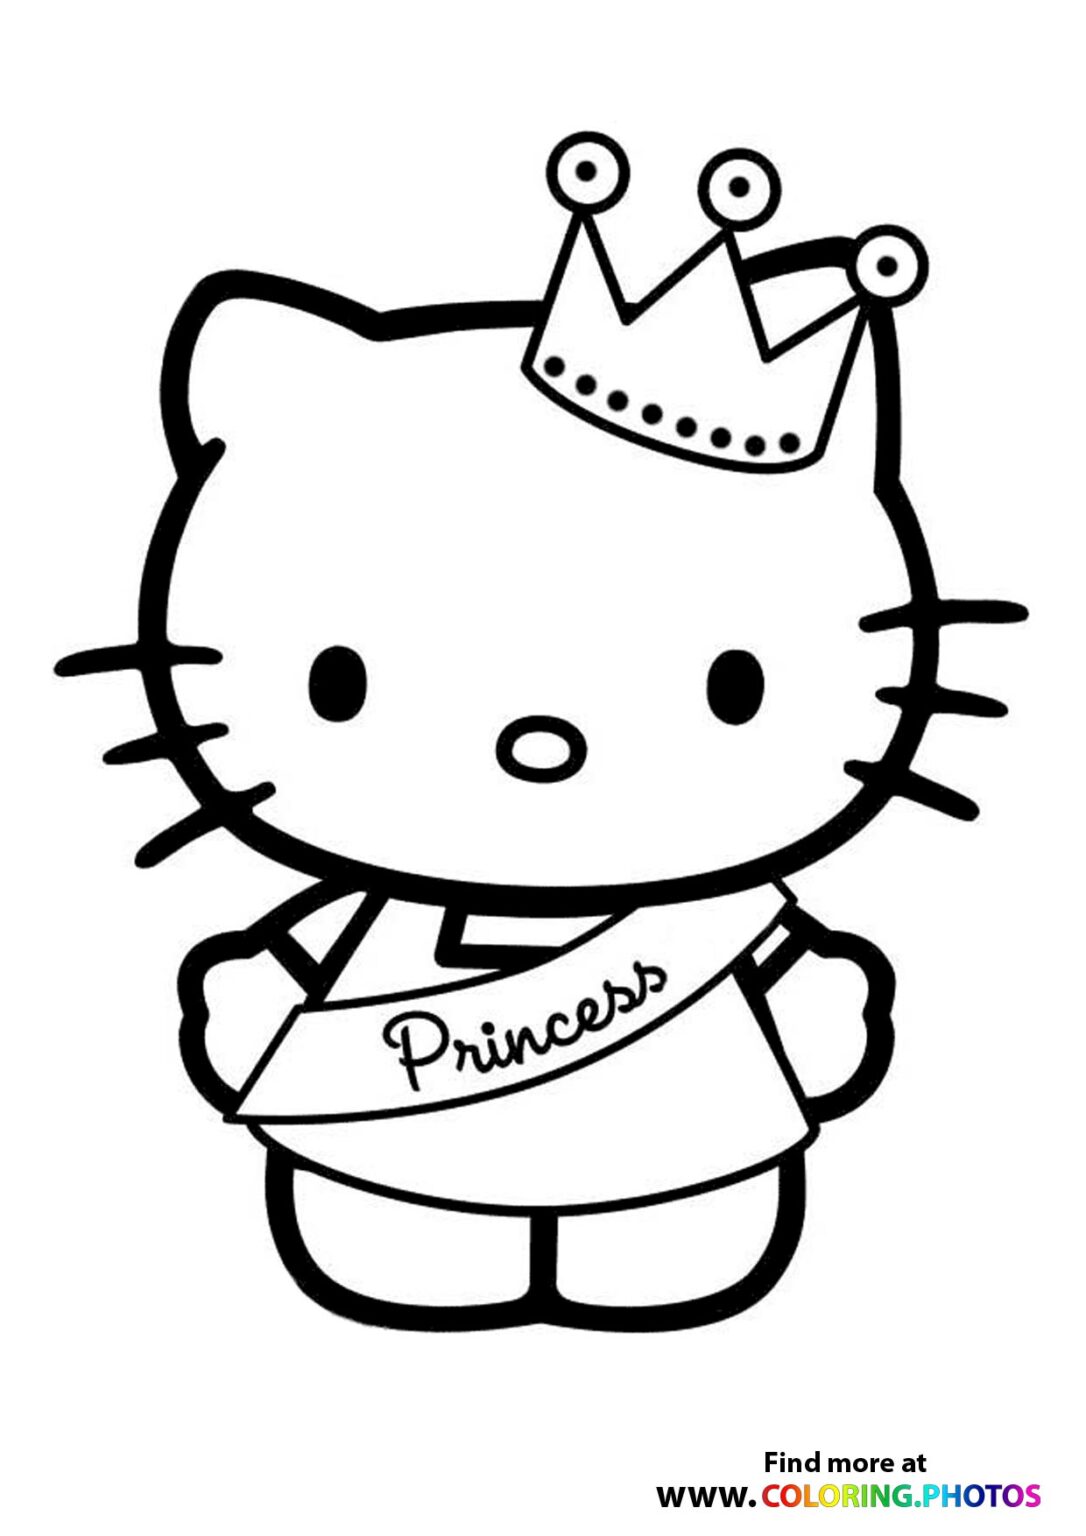 Hello Kitty princess - Coloring Pages for kids